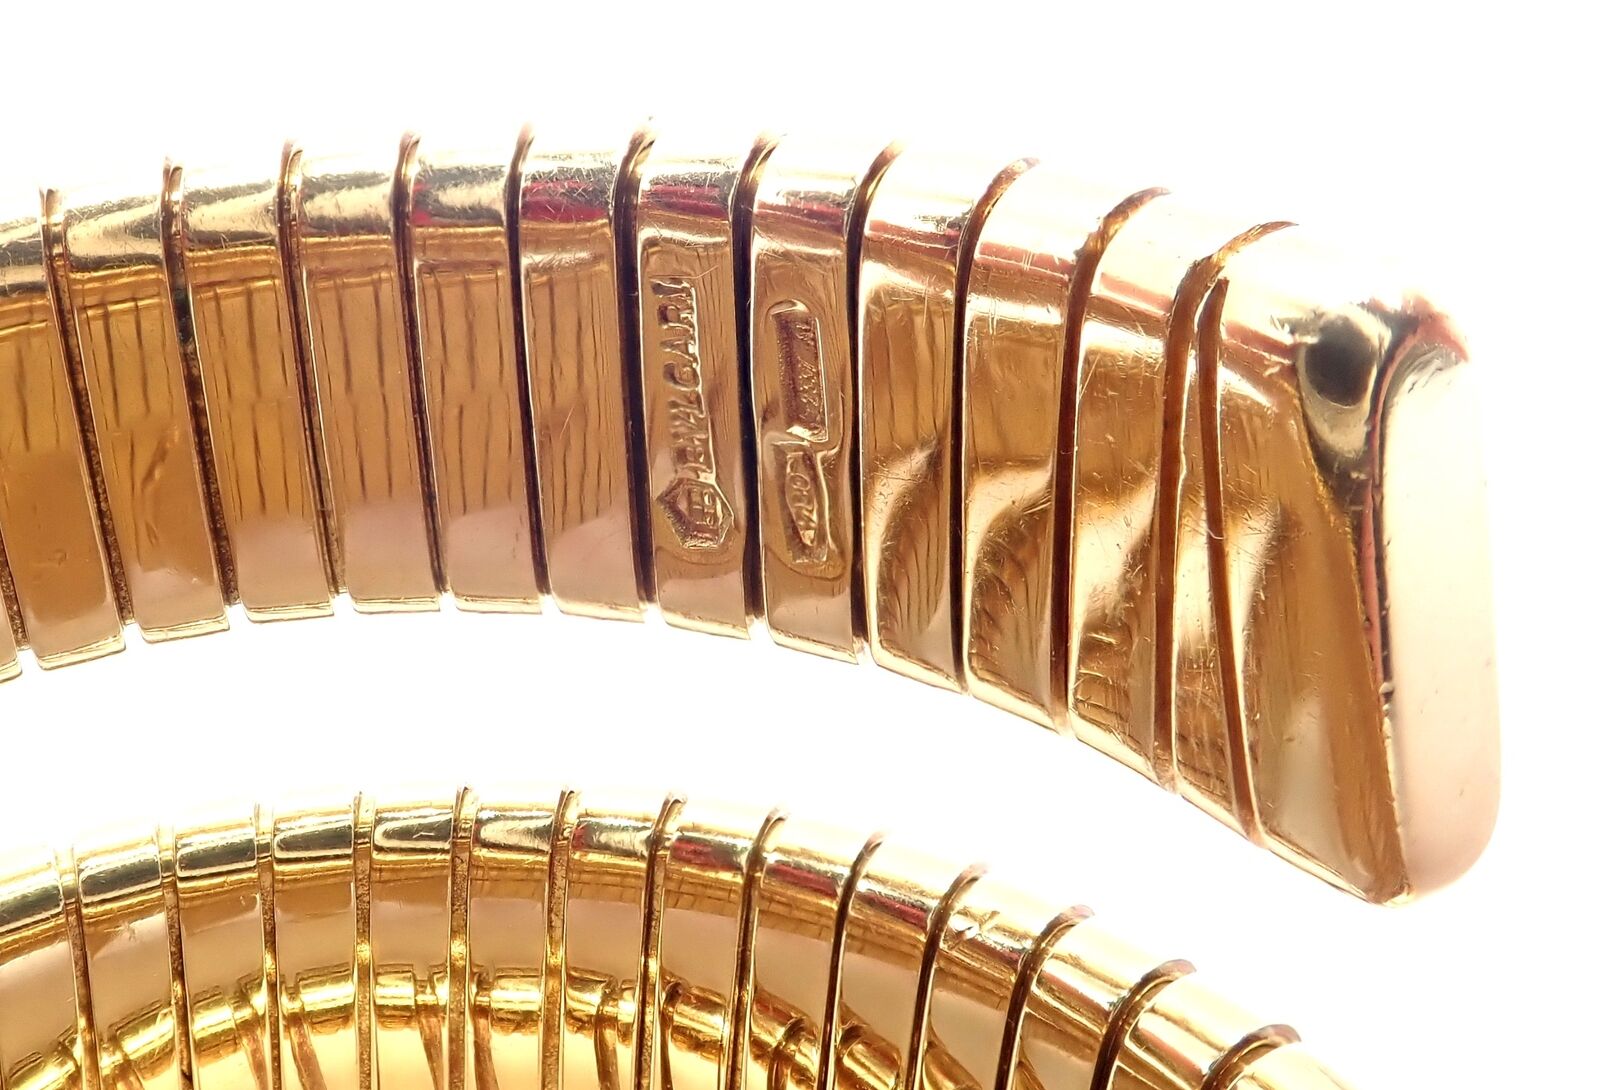 Bulgari Jewelry & Watches:Watches, Parts & Accessories:Watches:Wristwatches Authentic! Bulgari 18k Yellow Gold Tubogas Serpent Snake Bracelet Watch